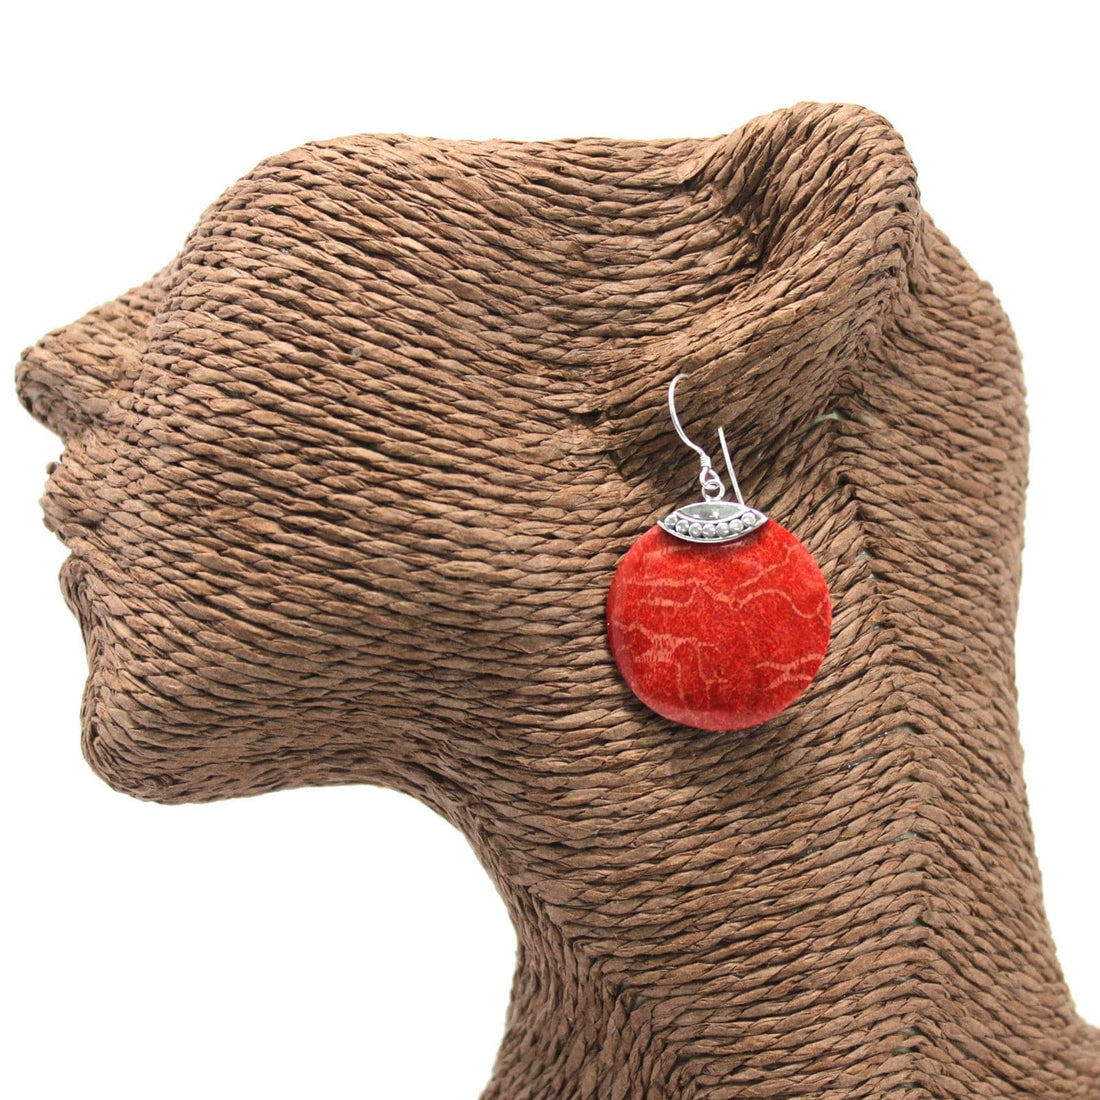 Coral Style 925 Silver Earrings - Classic Disc - best price from Maltashopper.com SEAR-01